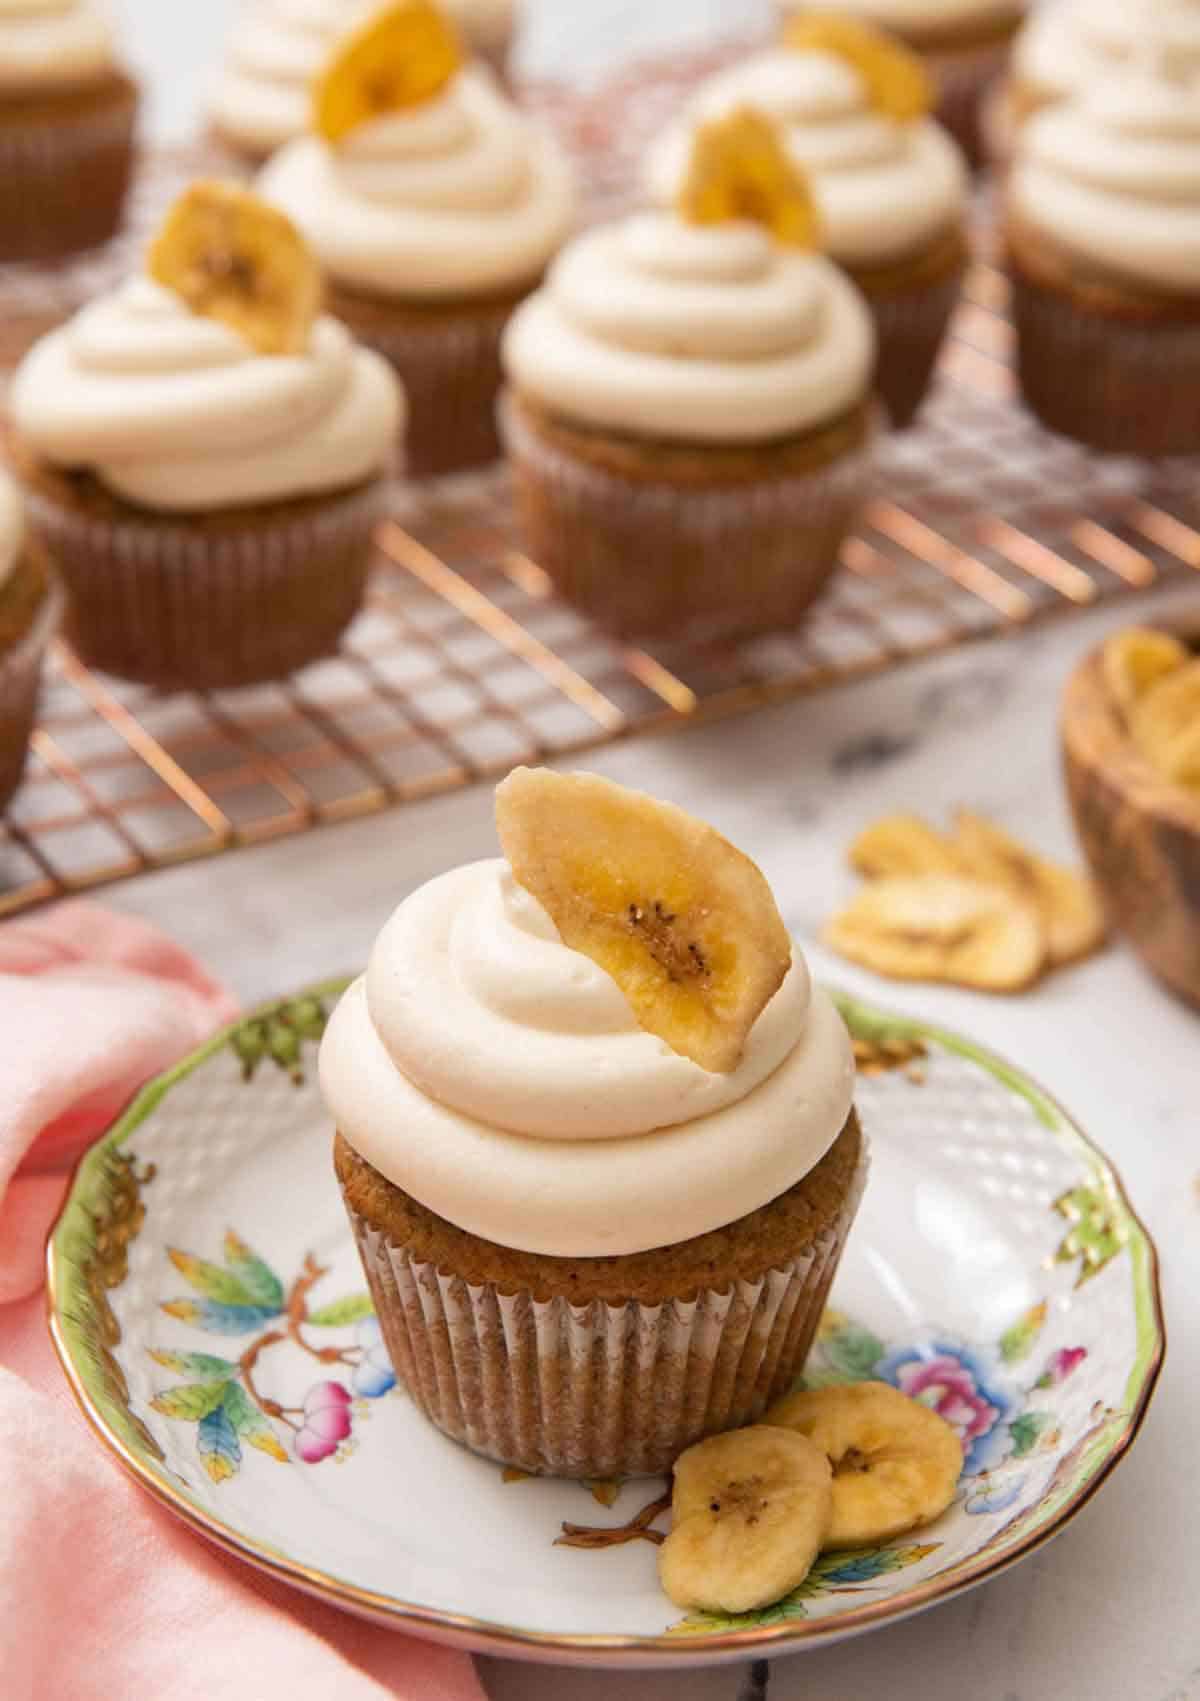 A small plate with a banana cupcake with a banana chip on top and more cupcakes in the back on a cooling rack.